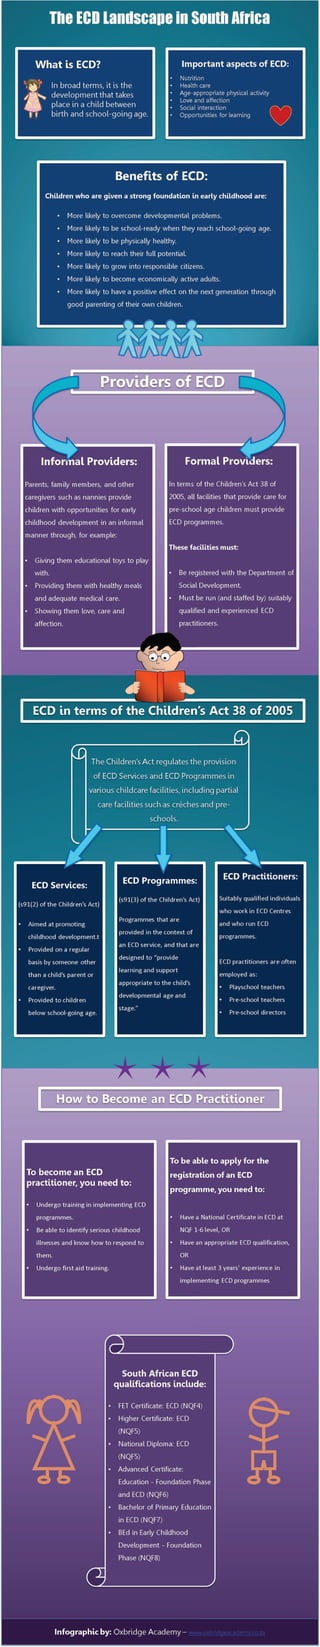 The ECD Landscape in South Africa